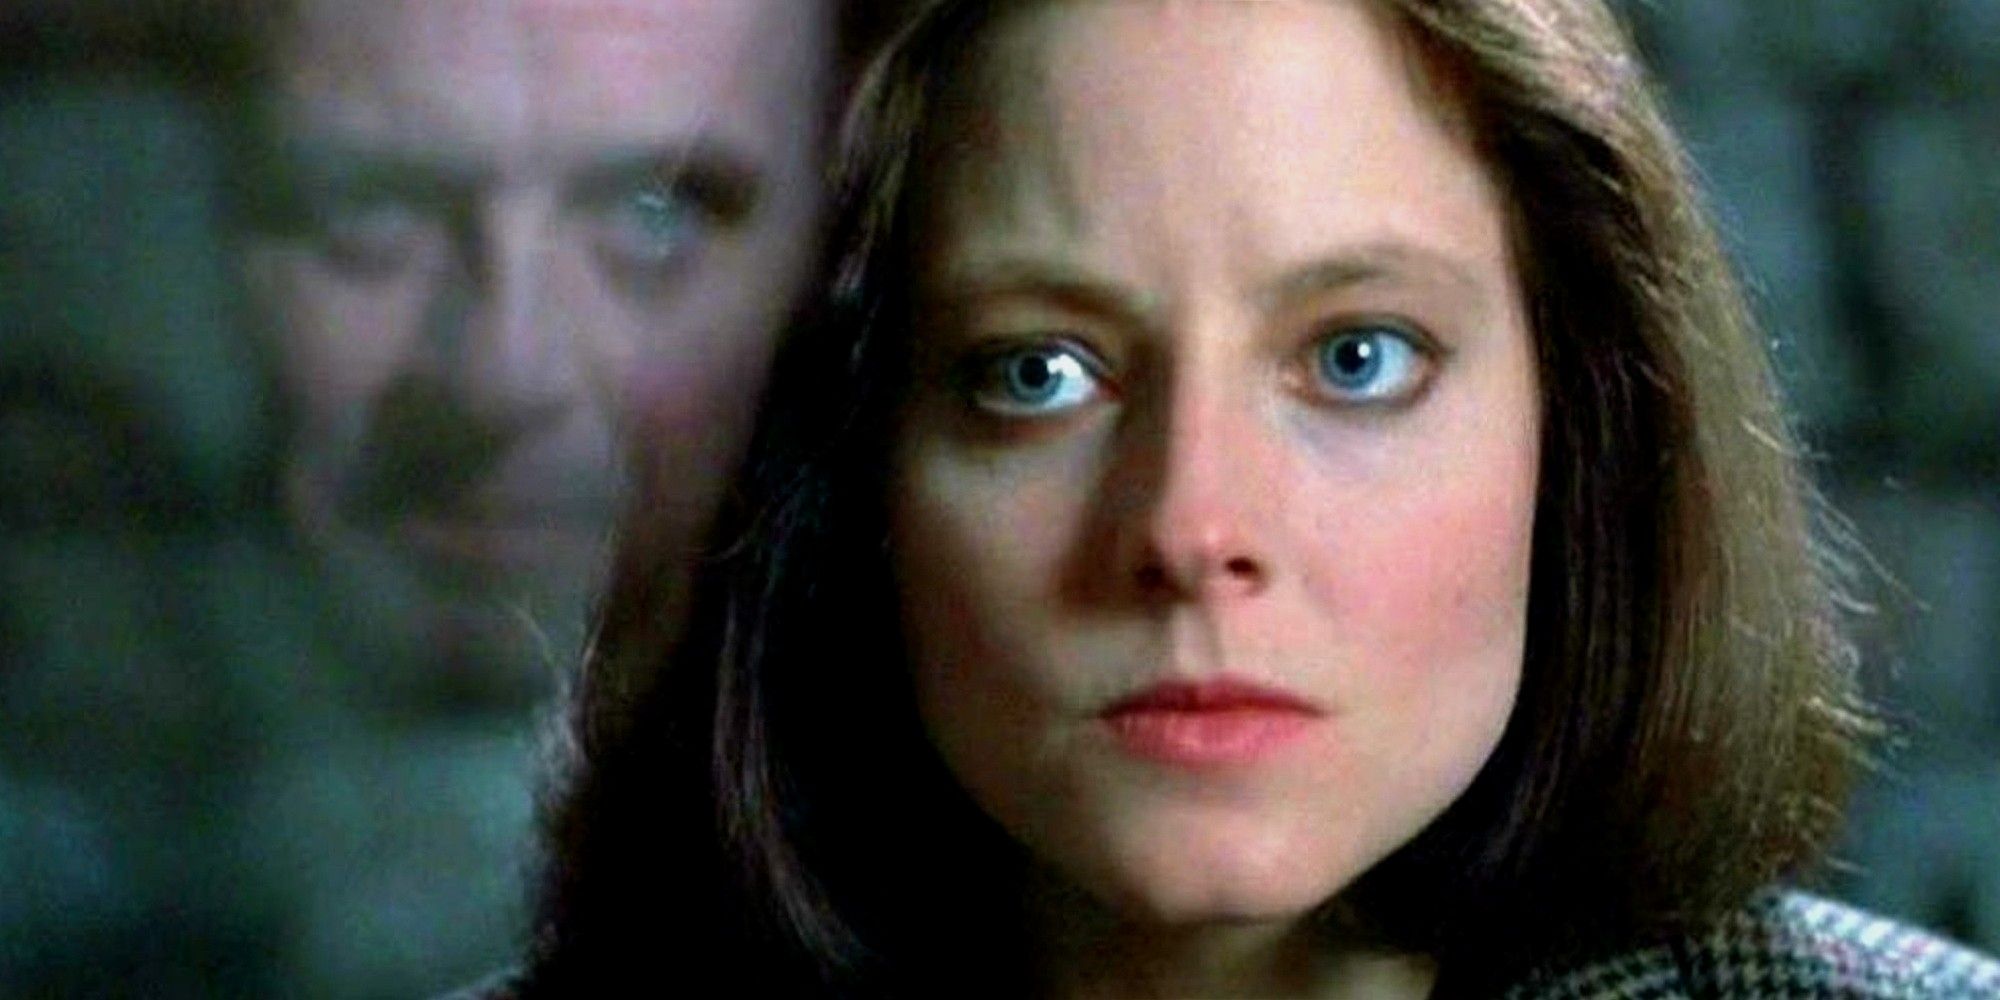 The Silence of the Lambs - Clarice looking at Hannibal through glass